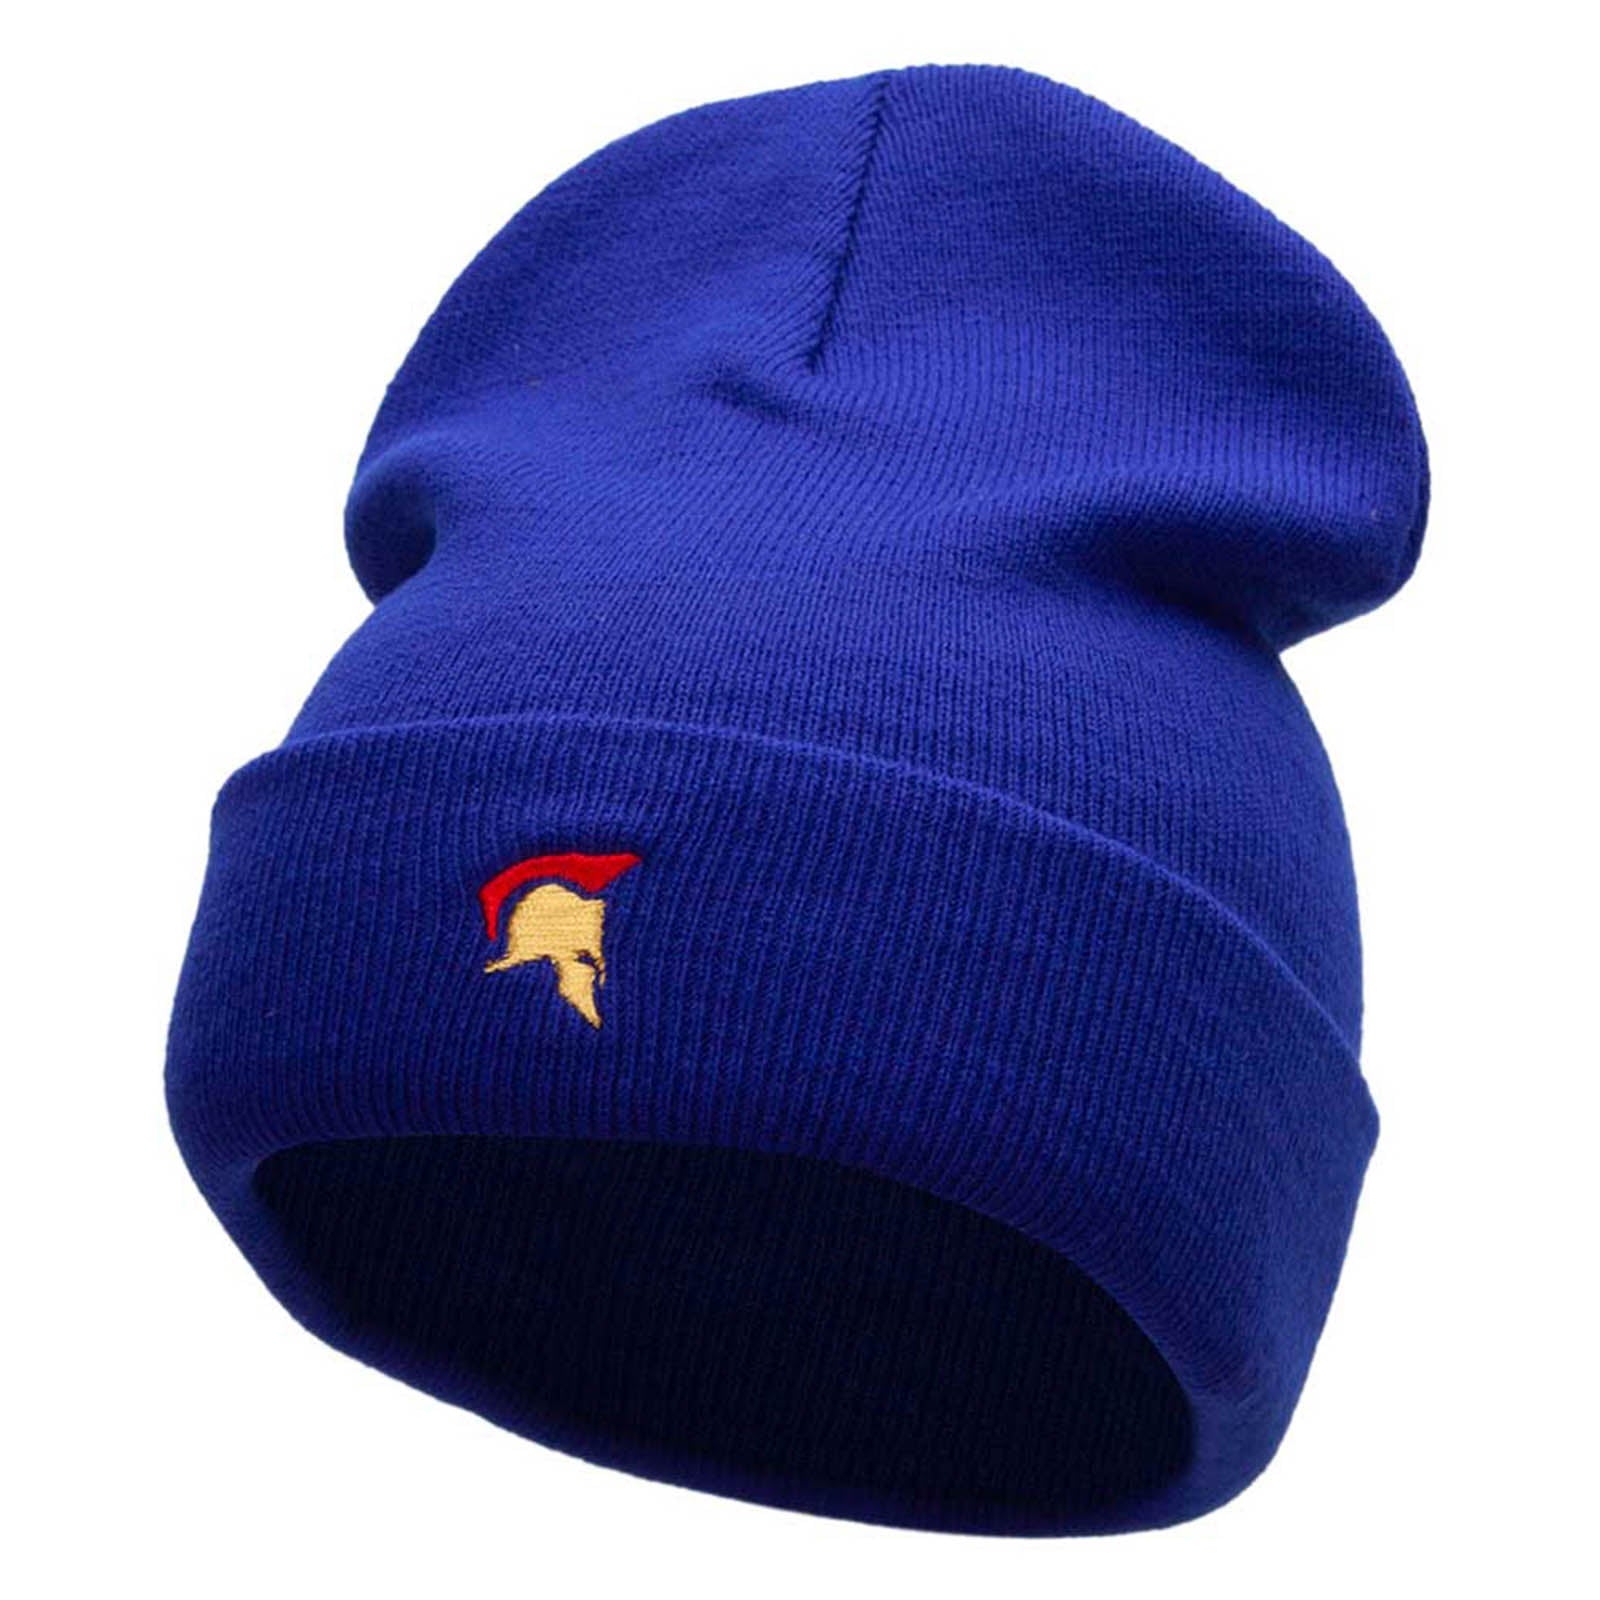 The Trojan Helmet Embroidered 12 Inch Long Knitted Beanie - Royal OSFM